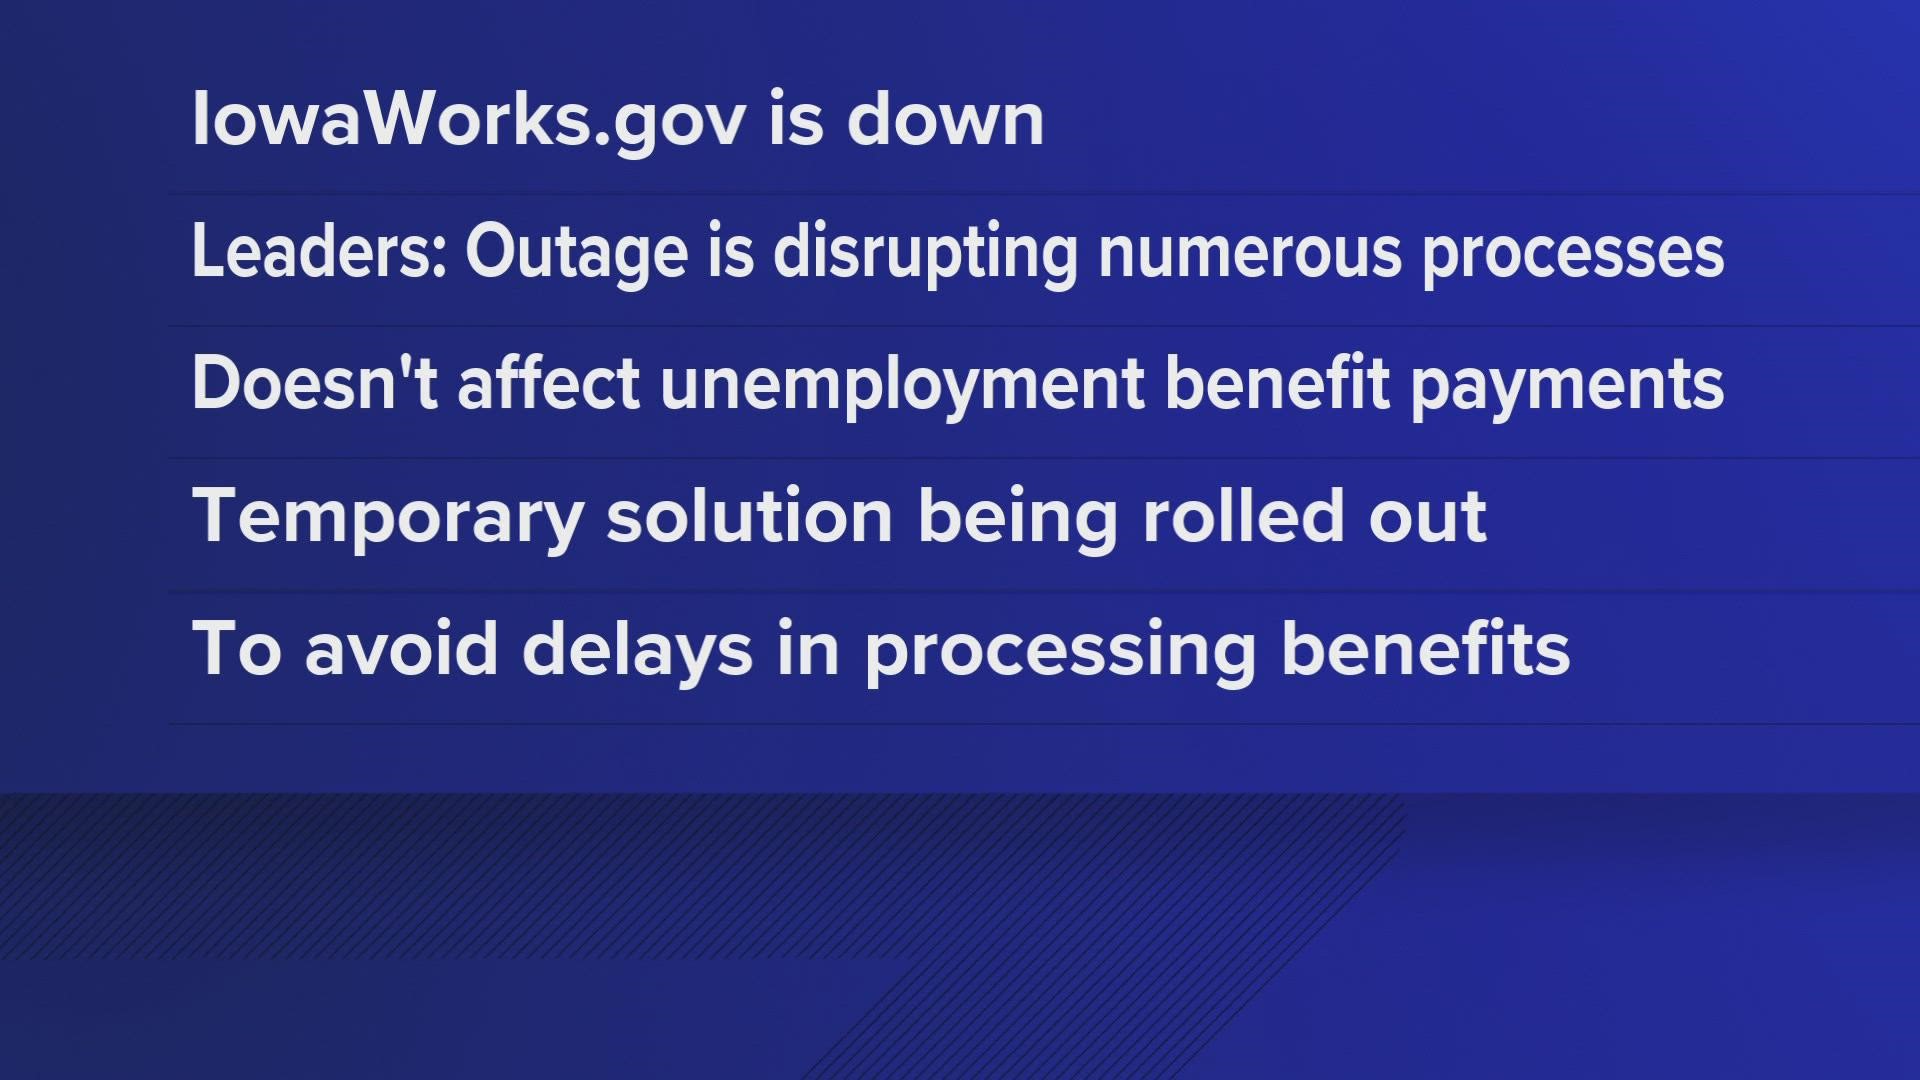 The outage, which was expected to last through at least Tuesday, is still out due to web vendor issues.